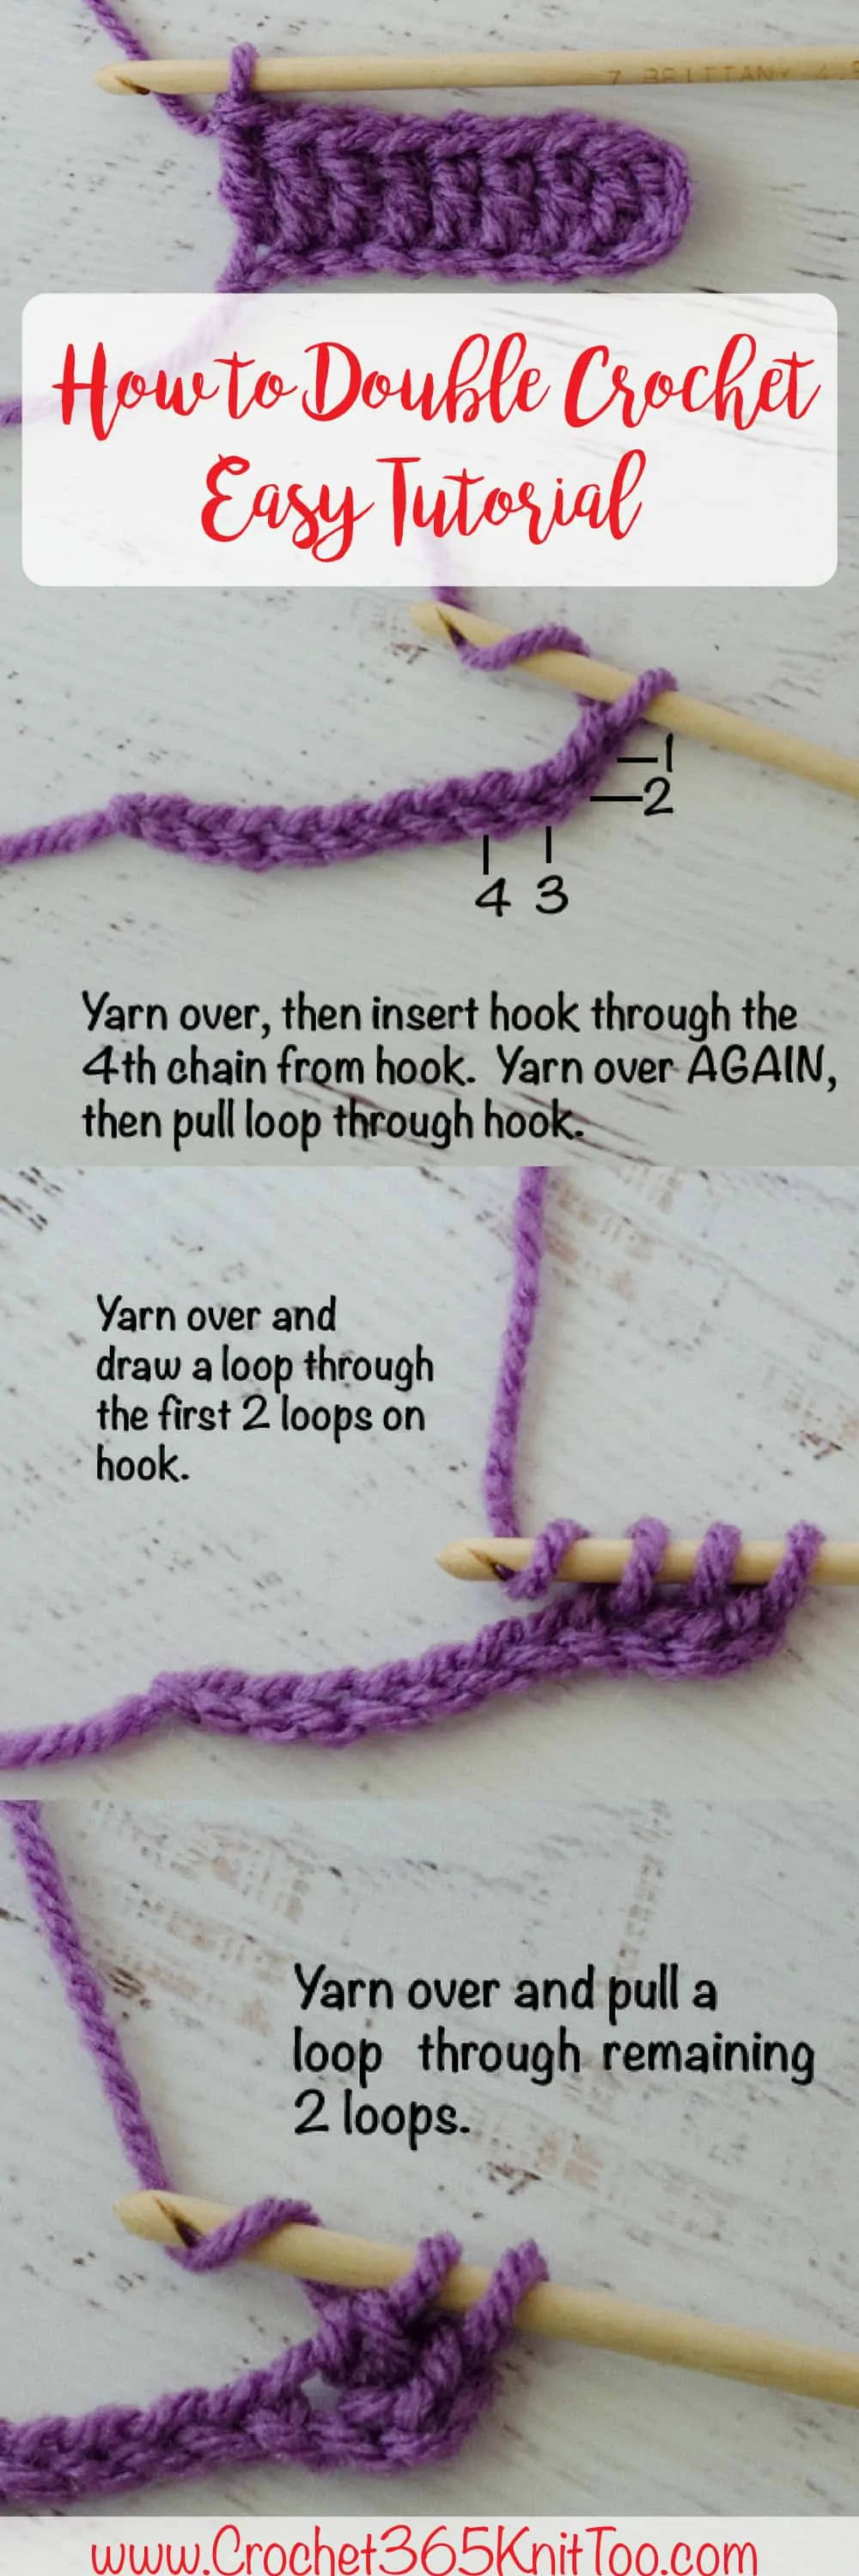 Graphic of how to crochet a double crochet stitch